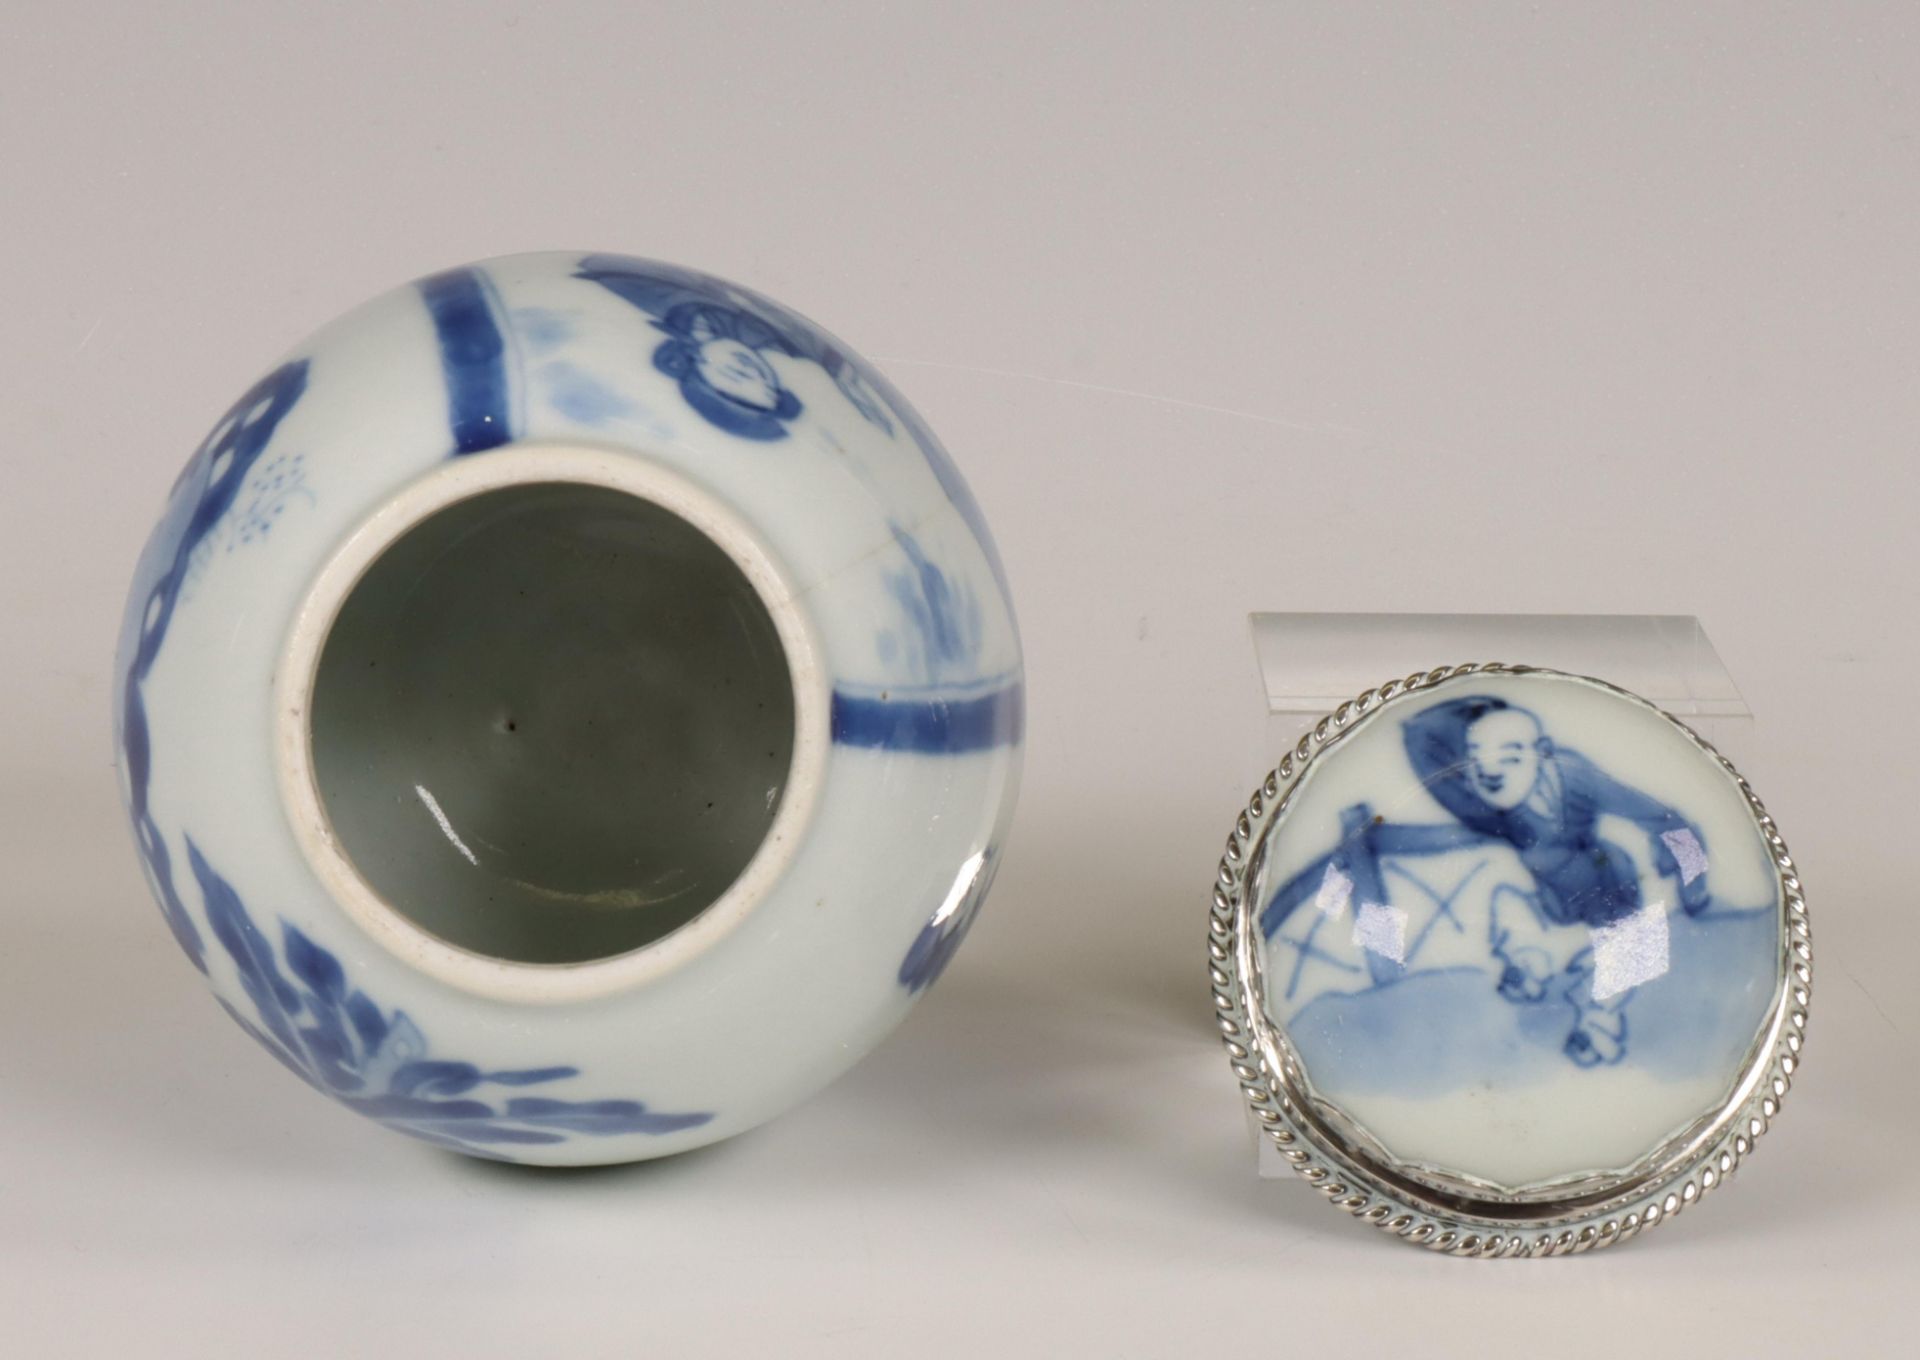 China, a silver-mounted blue and white porcelain oviform jar and cover, Kangxi period (1662-1722), t - Image 6 of 8